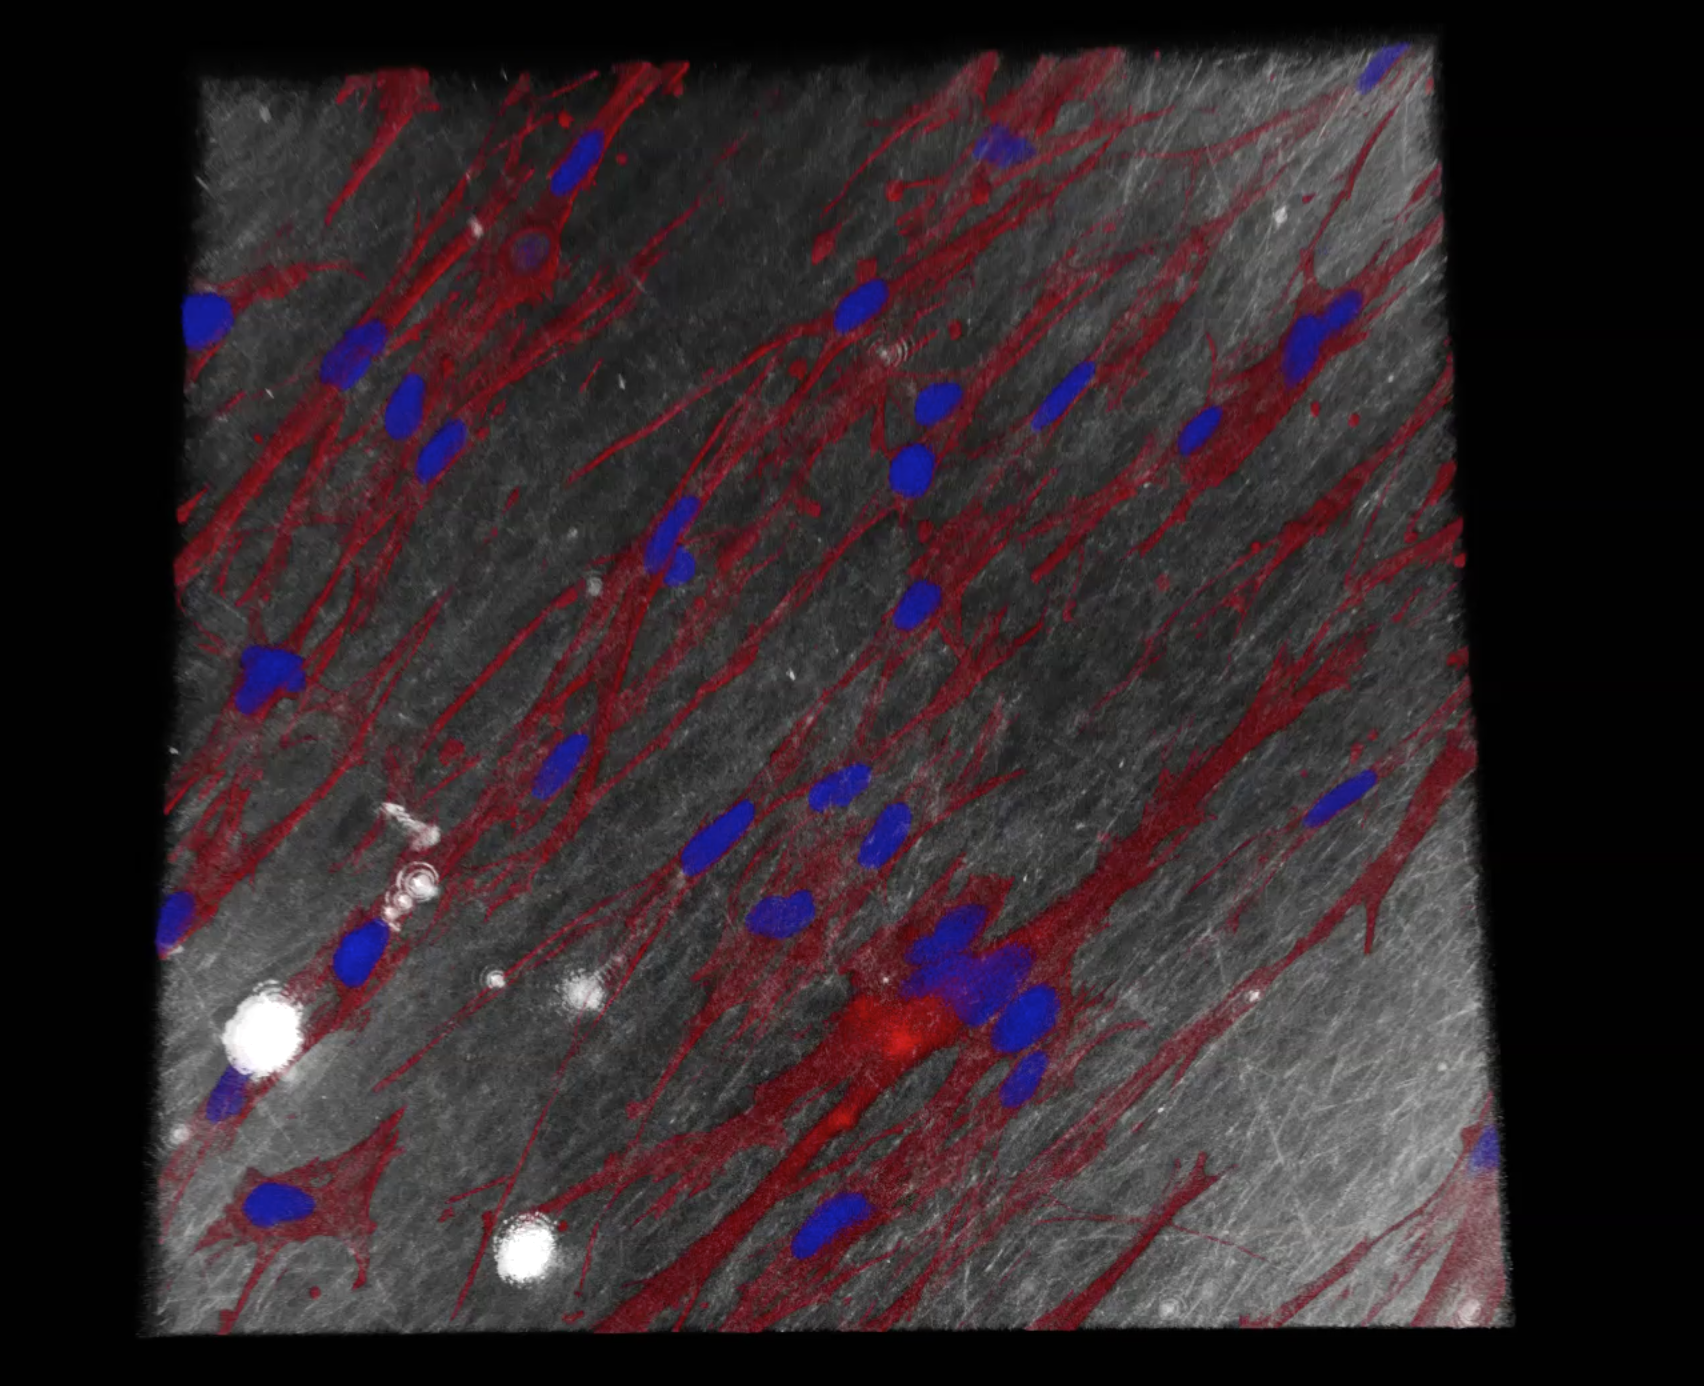 Fibroblasts (connec-tive tissue cells) on the elec-trospun Renacer® membrane under the confocal micro-scope (red: cytoskeleton of the cells, blue: cell nuclei). 